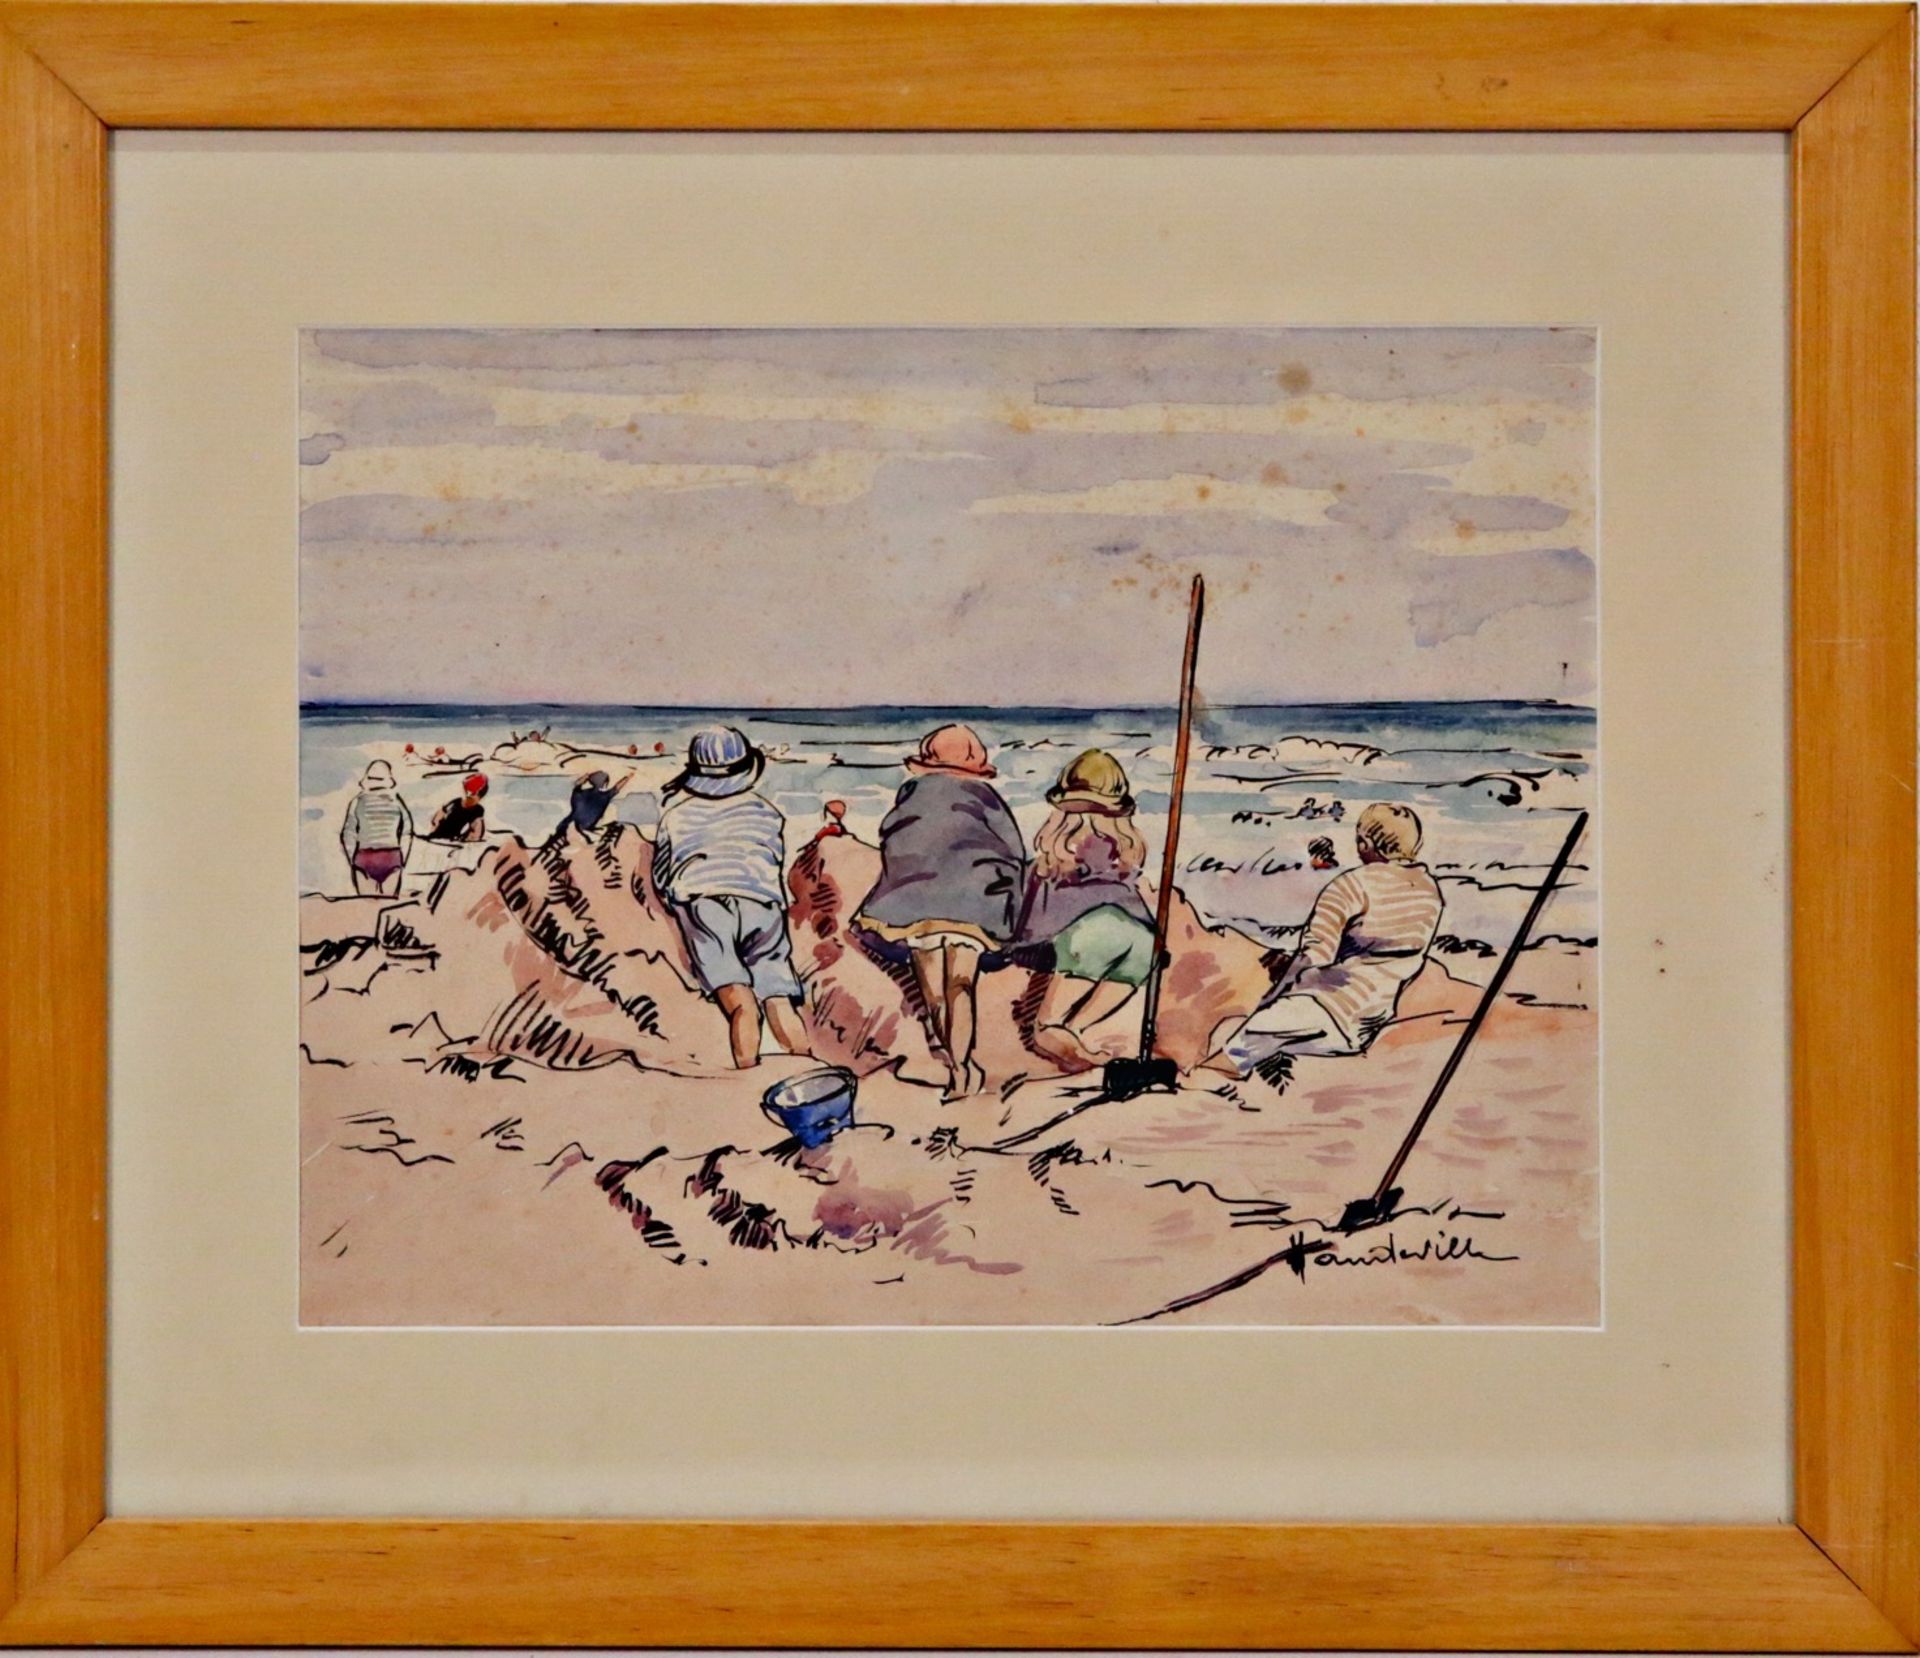 Leon HAUDEVILLE (1885-1969) "Children at the beach", watercolor on paper, French painting, 20th _. - Bild 2 aus 5